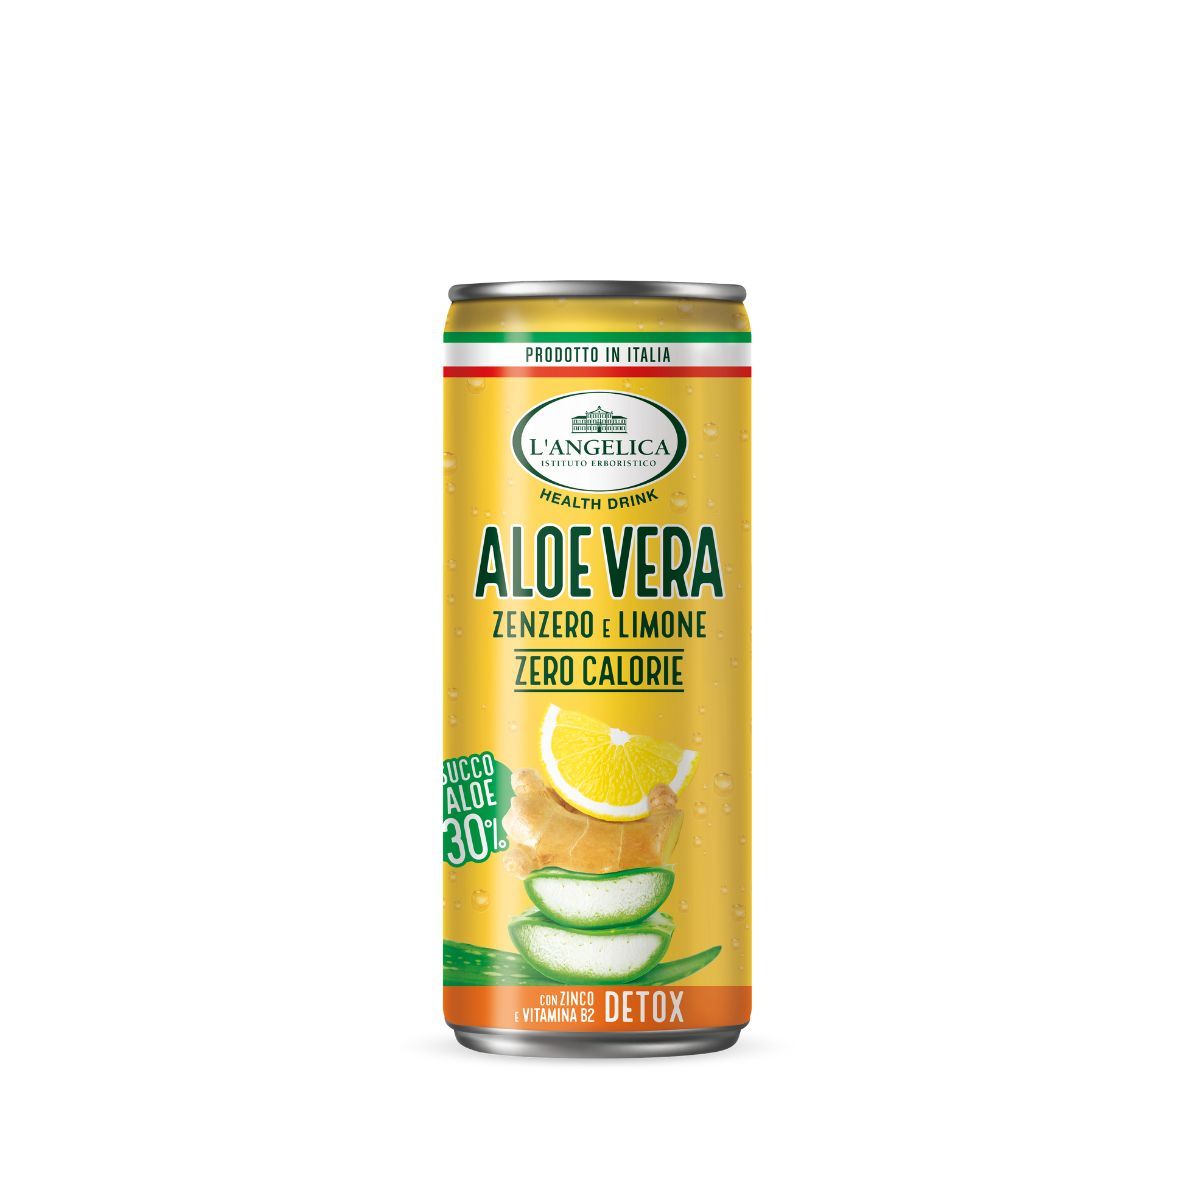 Drink Aloe Vera 30% in cans - Ginger and Lemon